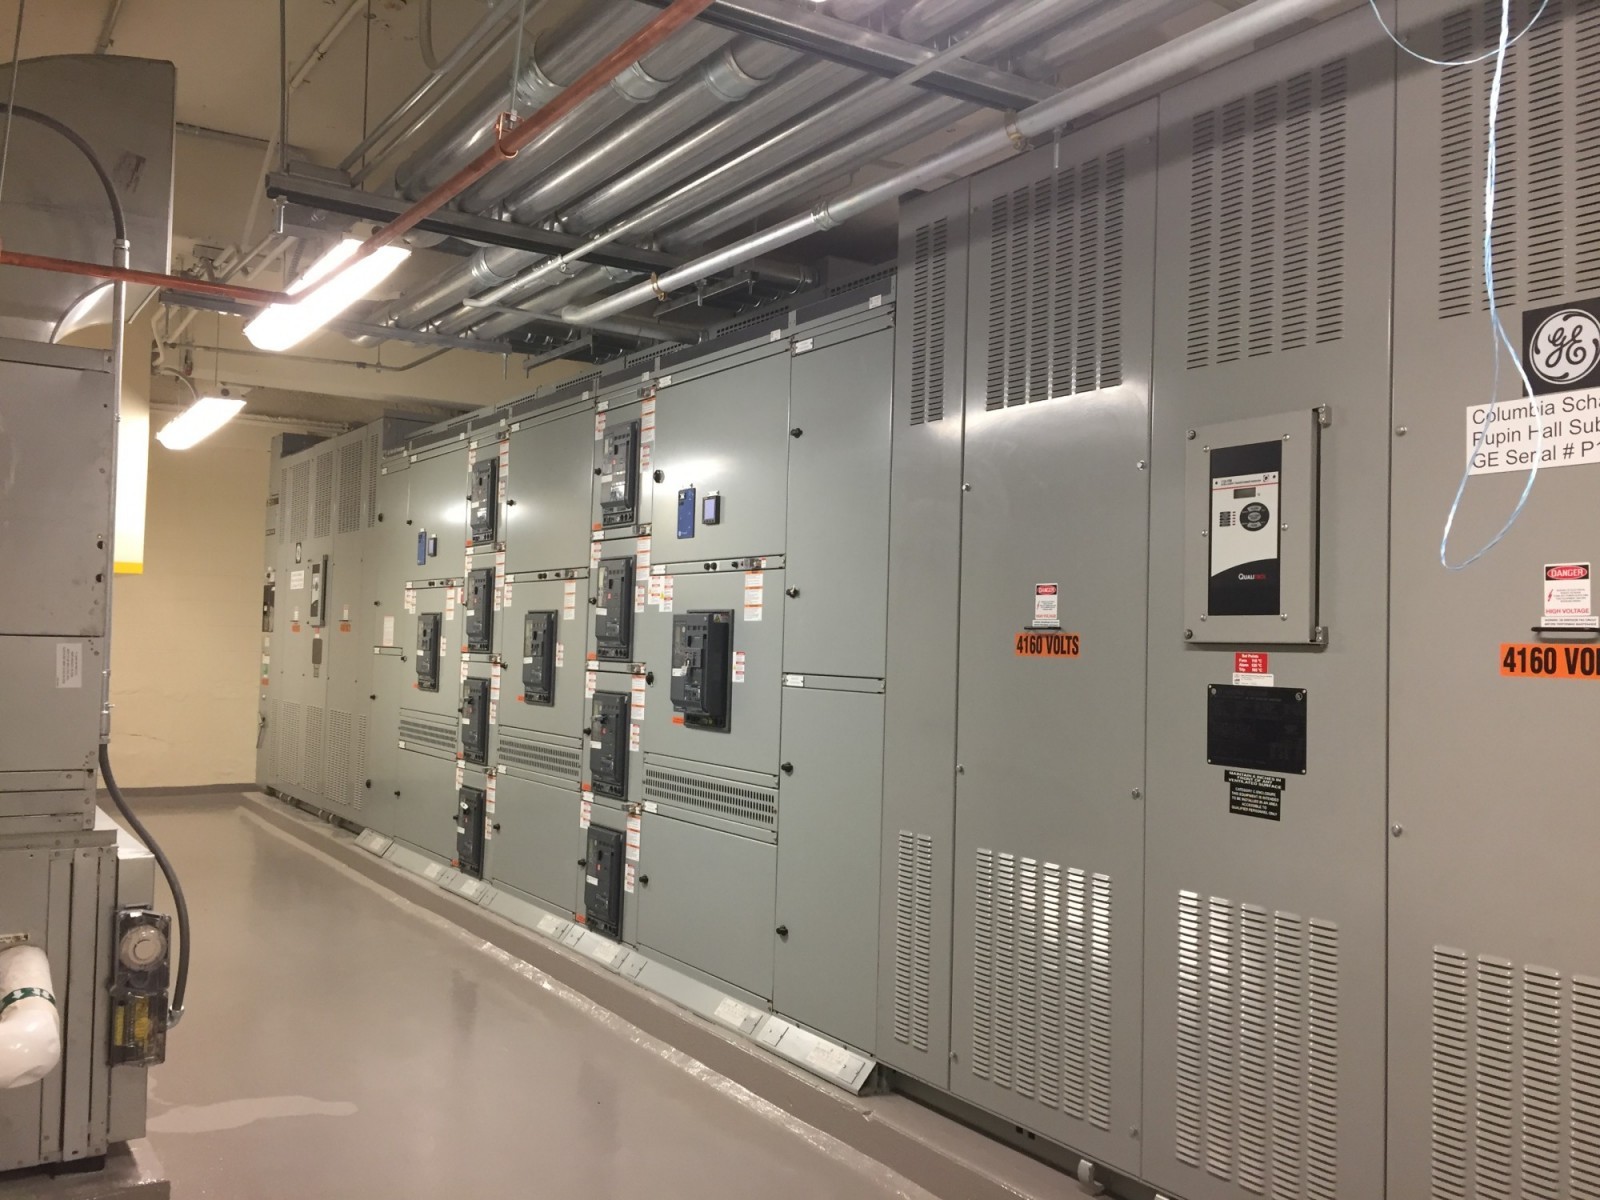 Basement-level metal mechanical equipment and electrical boxes.